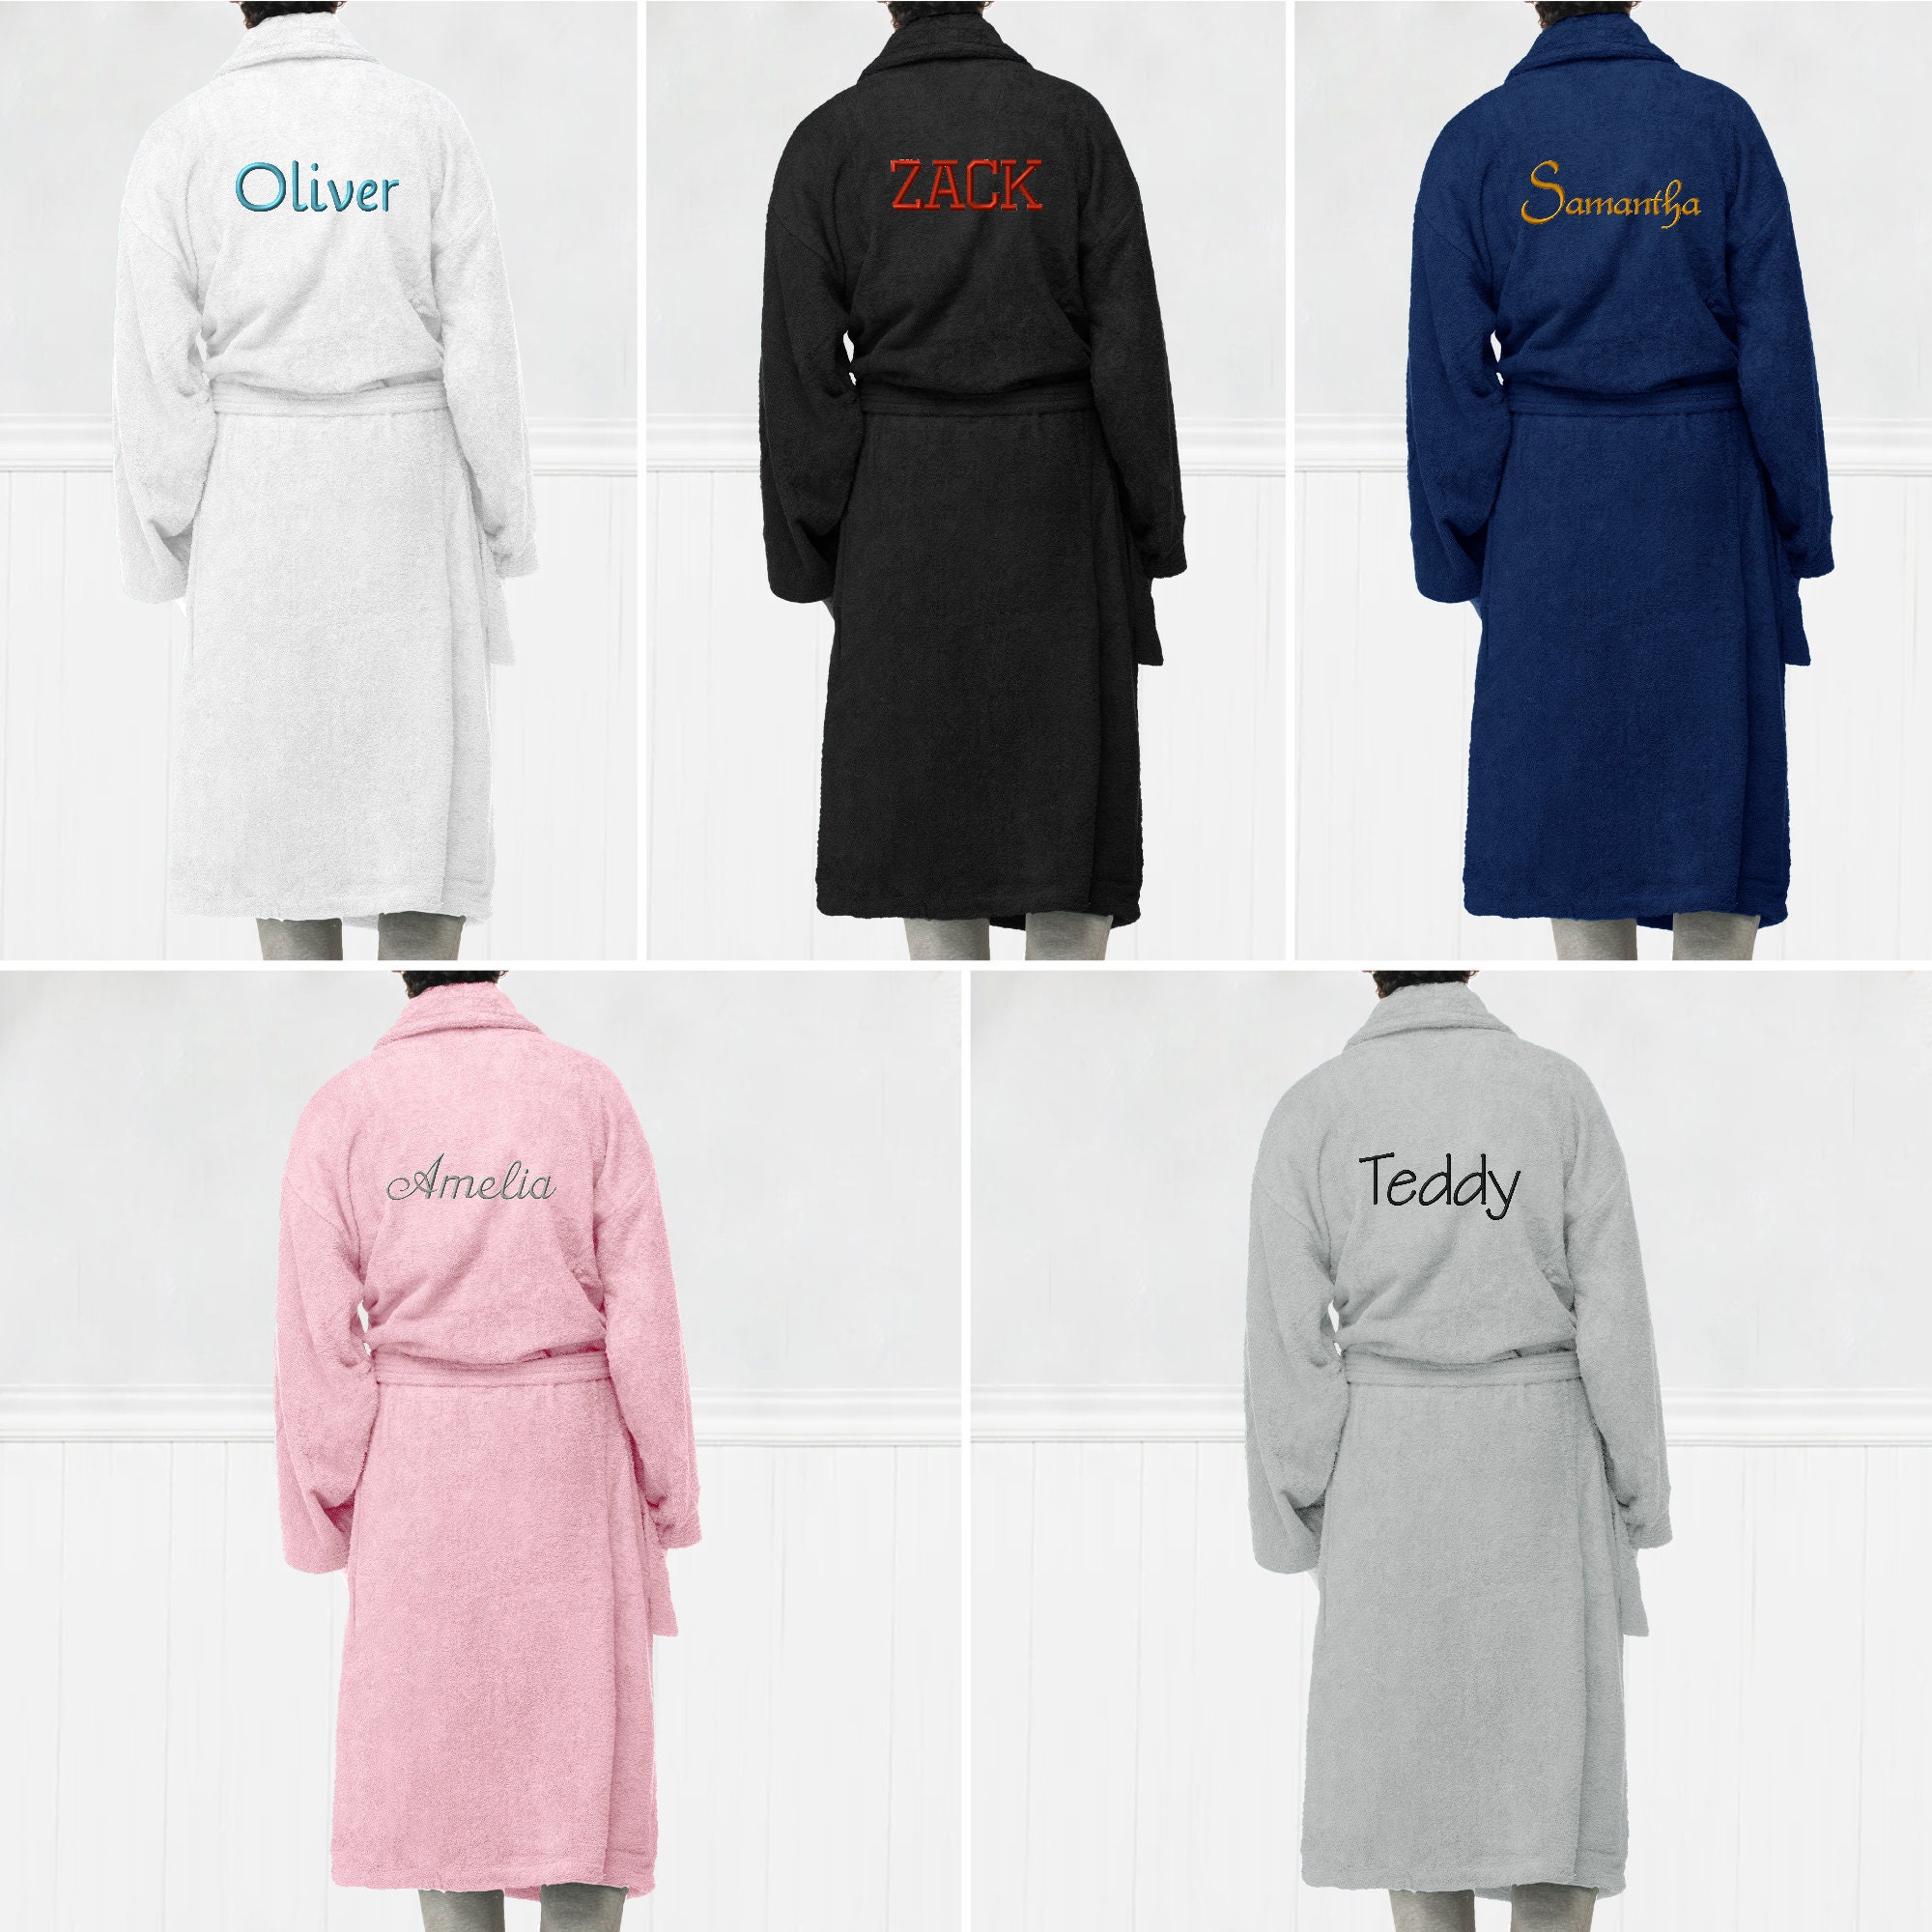 Personalised Bathrobe 100% Premium Egyptian Cotton, One Size, Adults Unisex With Custom Embroidery - Hotel Quality